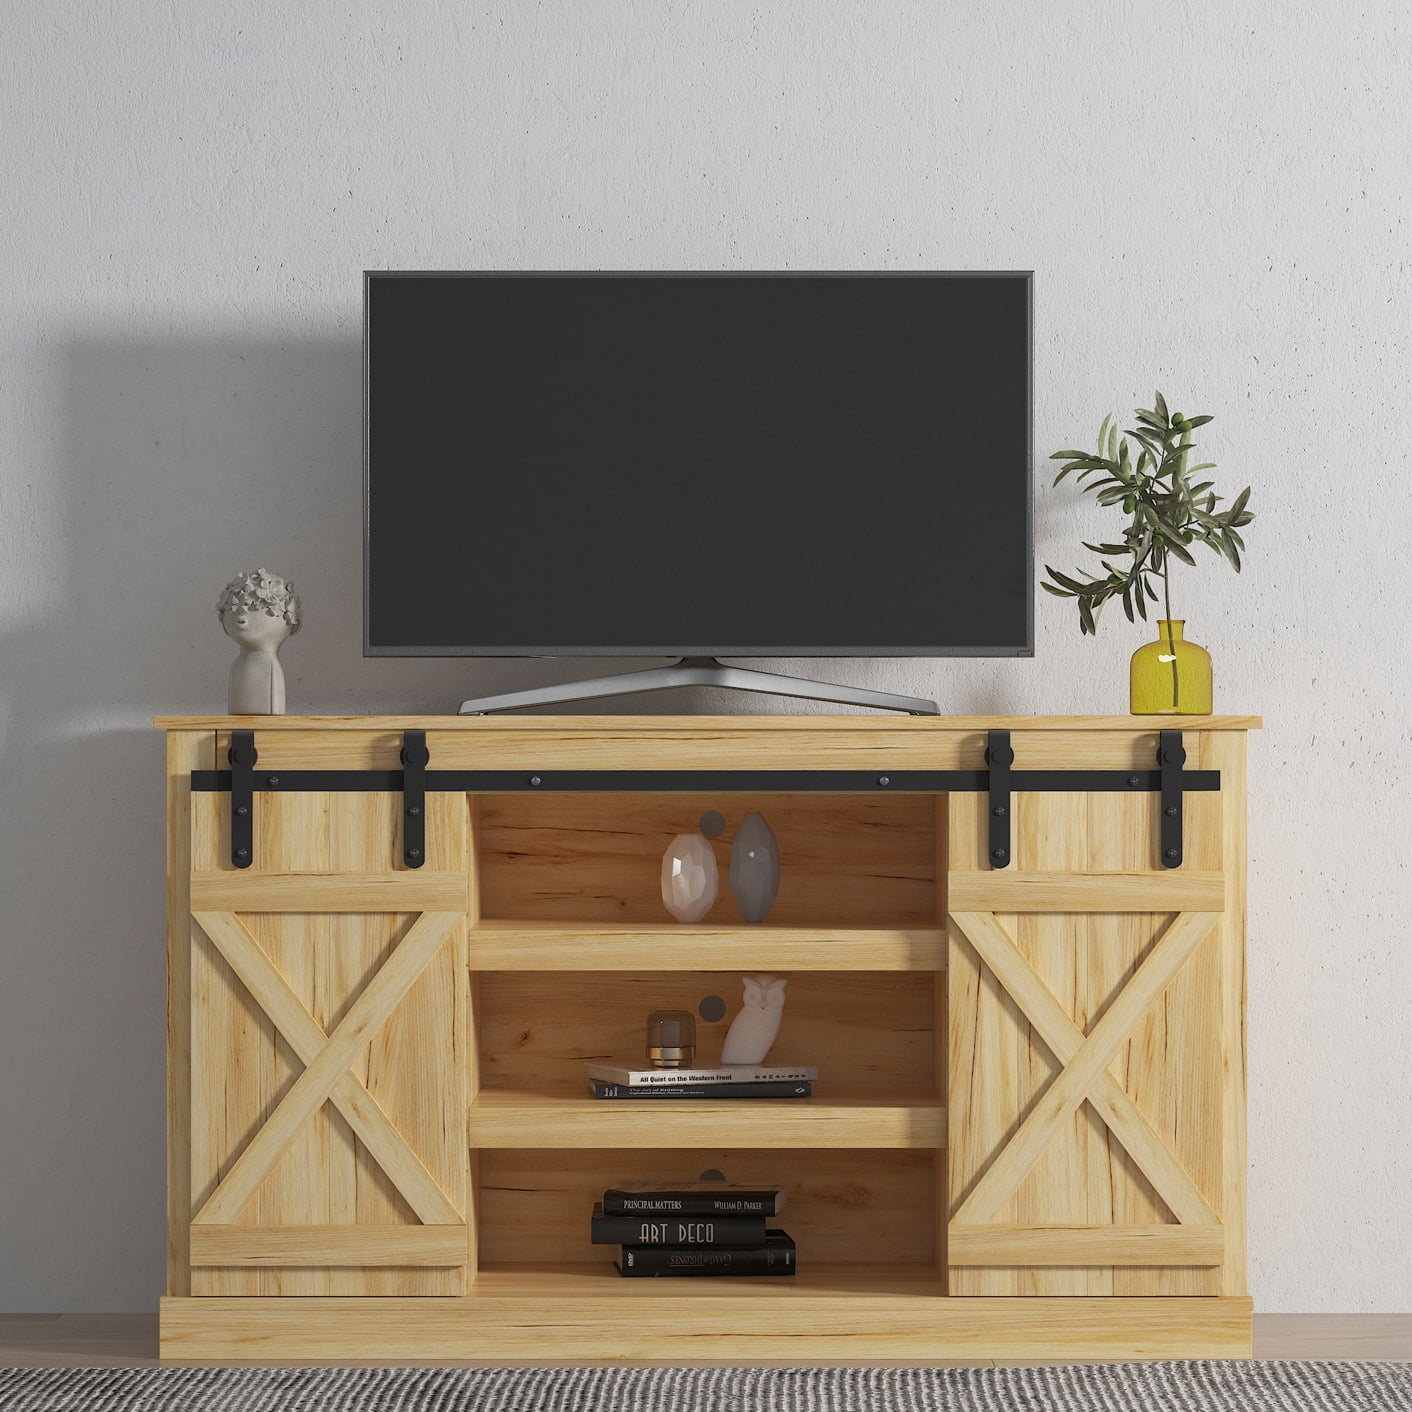 Tv Cabinet With Shelves Farmhouse